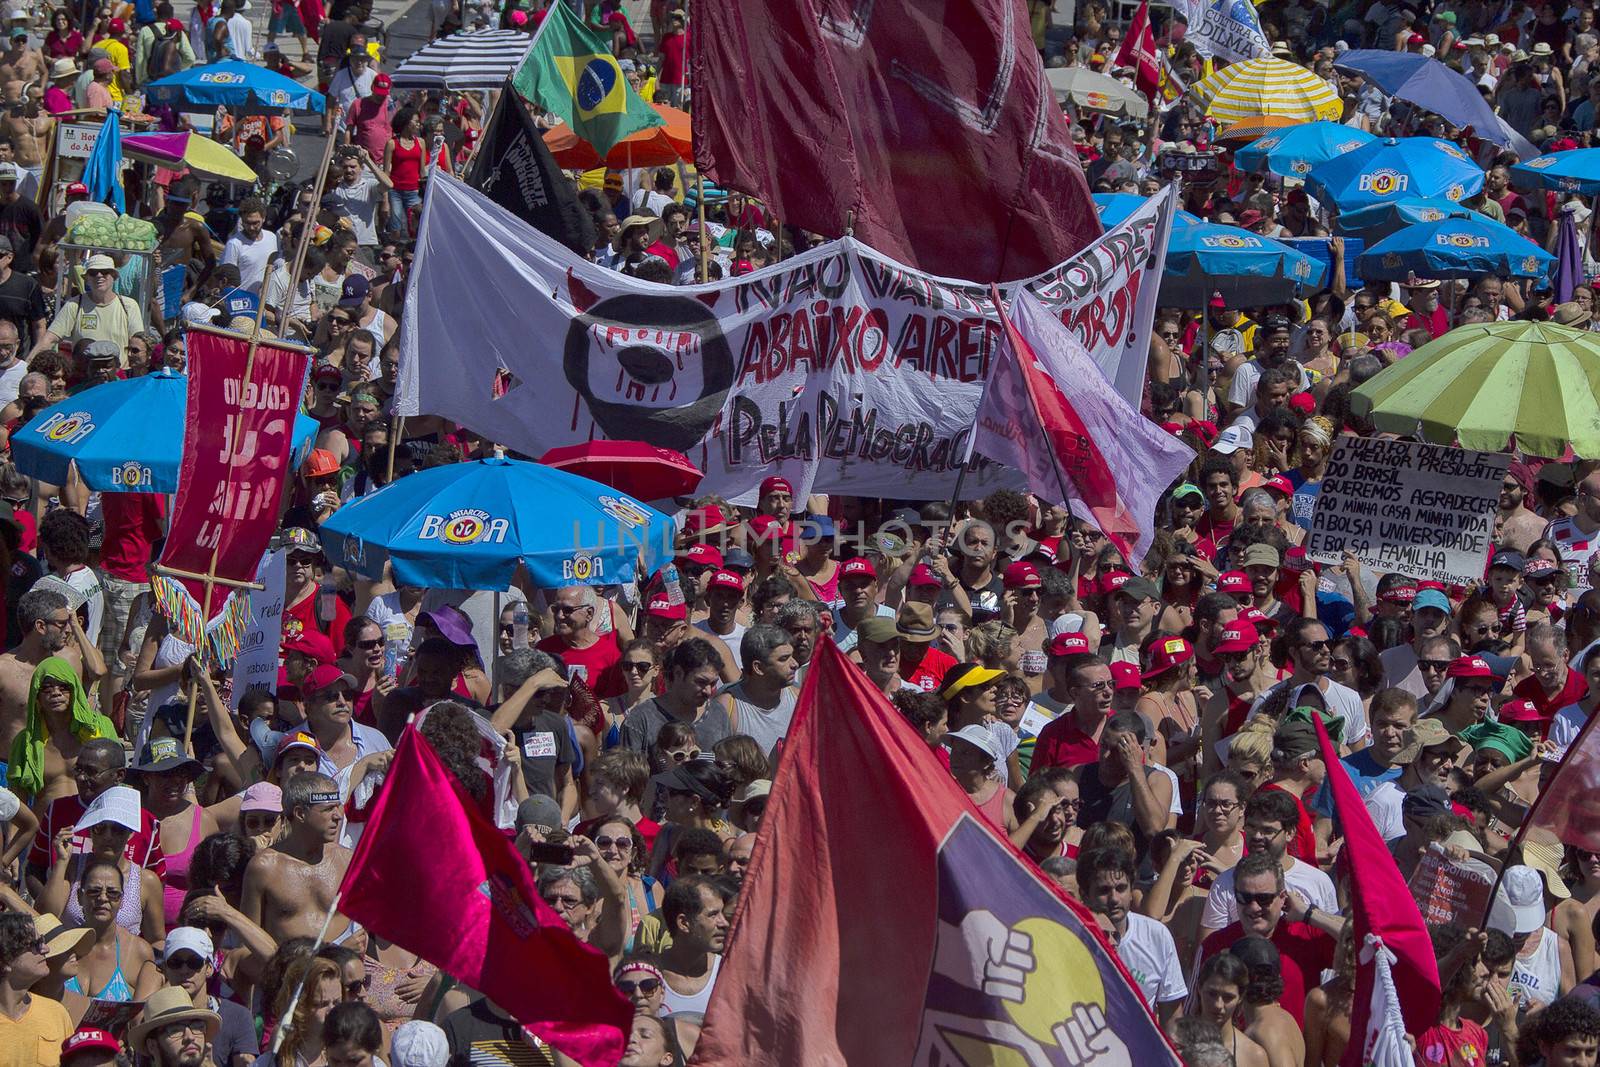 BRAZIL, Rio de Janeiro: Thousands of protesters rallied on Copacabana Beach in Rio de Janeiro, Brazil on April 17, 2016, against the impeachment of President Dilma Rousseff.Rousseff faces an impeachment vote today over charges of manipulating government accounts. Brazil's lower house is voting on whether to continue impeachment proceedings. 342 out of 513 votes are needed to continue the proceedings to the upper house. 